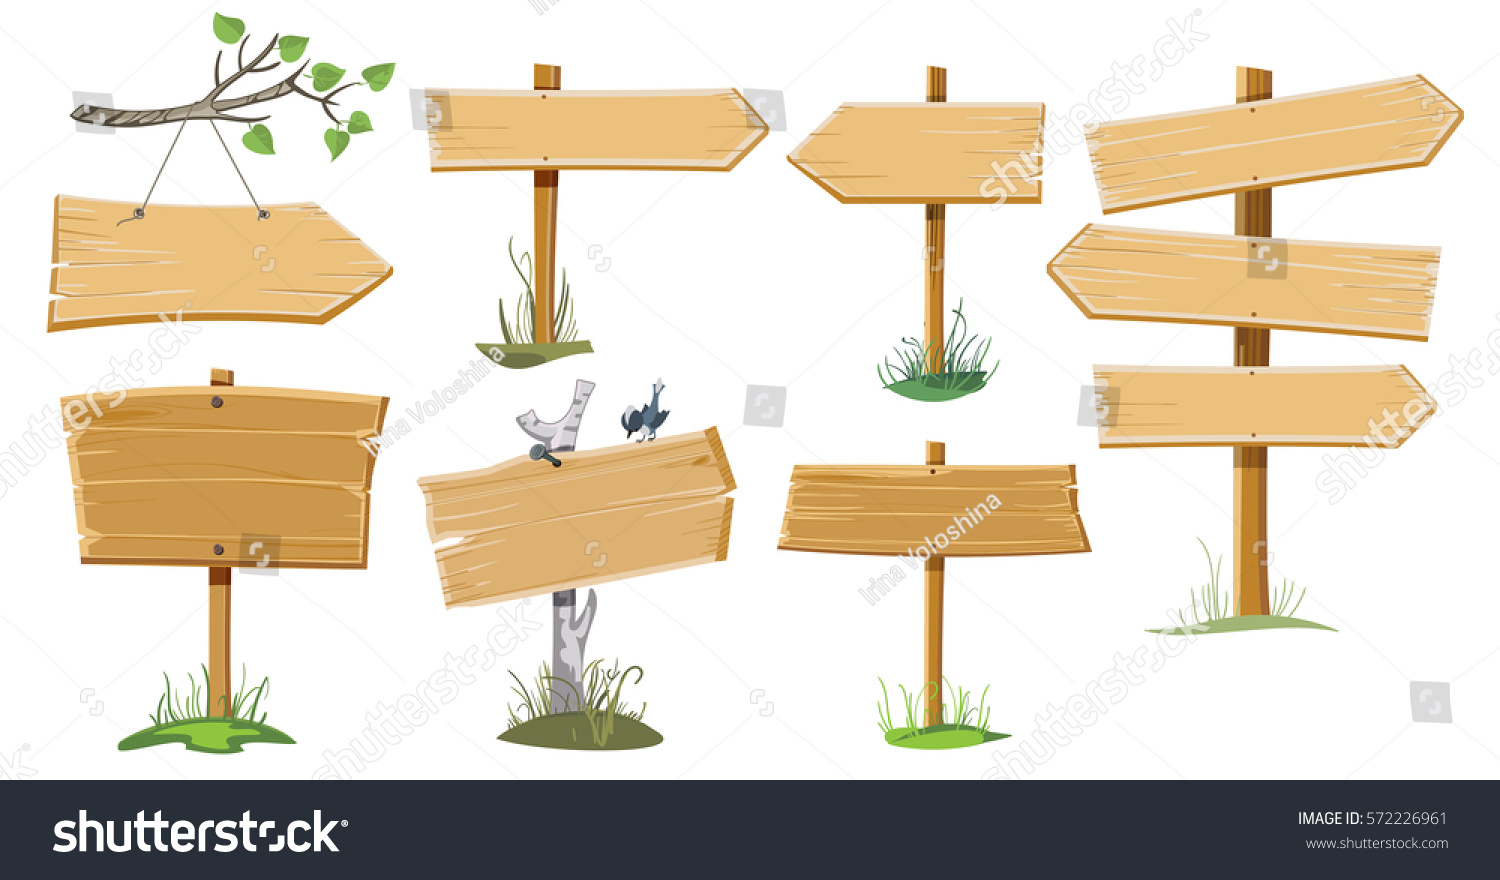 A set of several wooden street signs #572226961